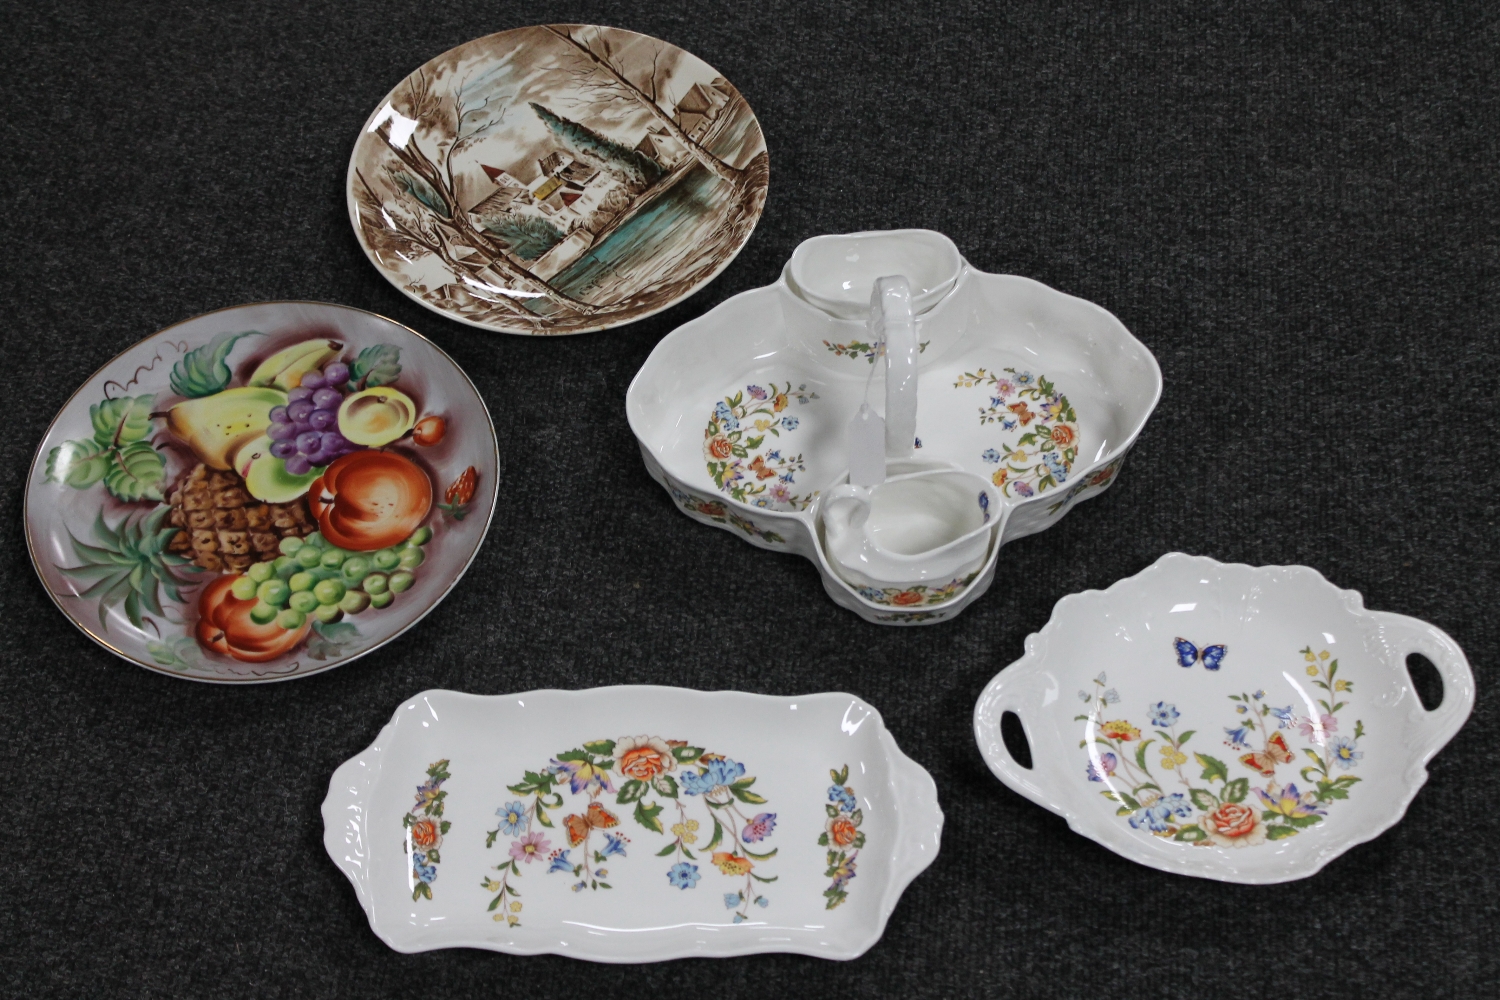 An Aynsley cottage garden three piece serving set together with two further Aynsley dishes and two